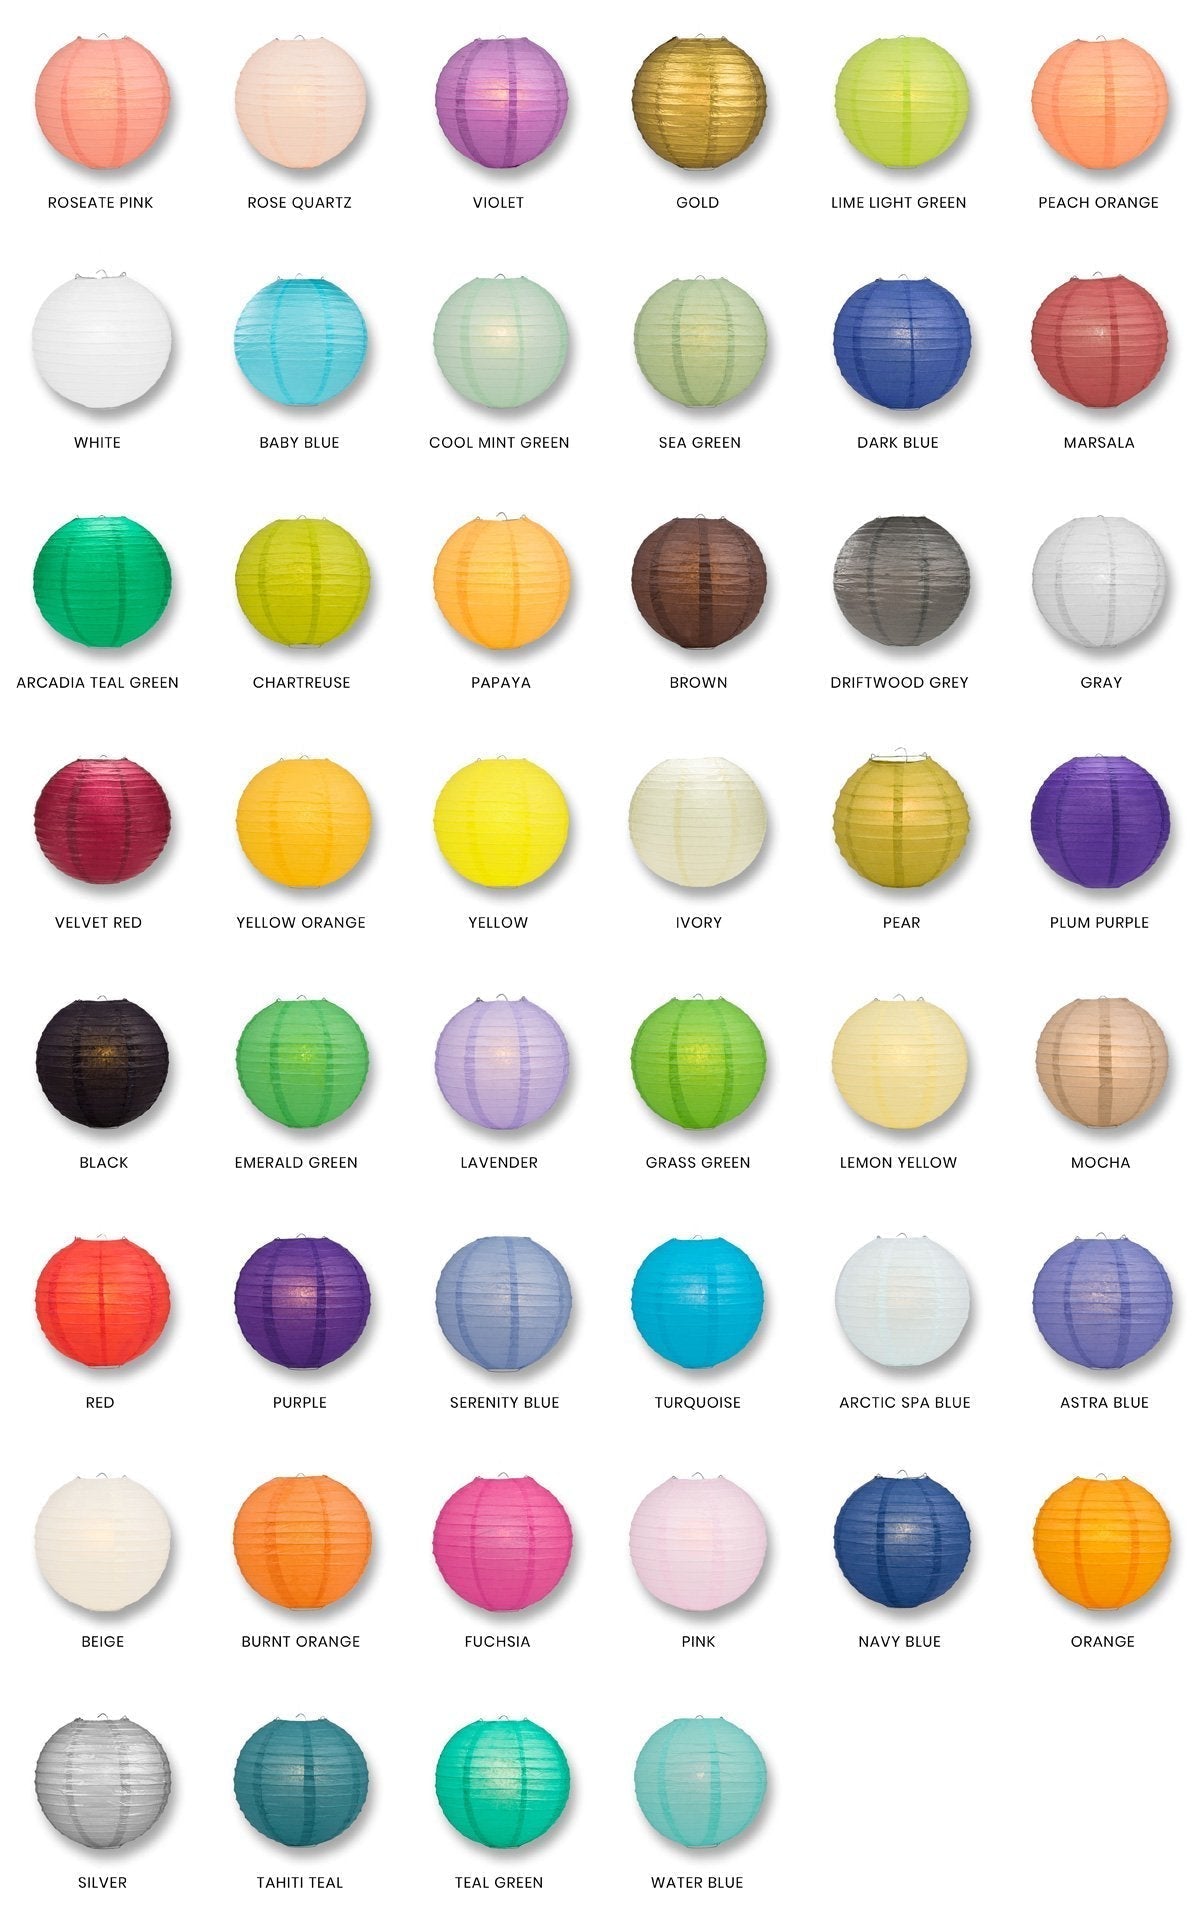 42" Even Ribbing Paper Lanterns - Door-2-Door - Various Colors Available (6-Pack Master Case, 60-Day Processing)